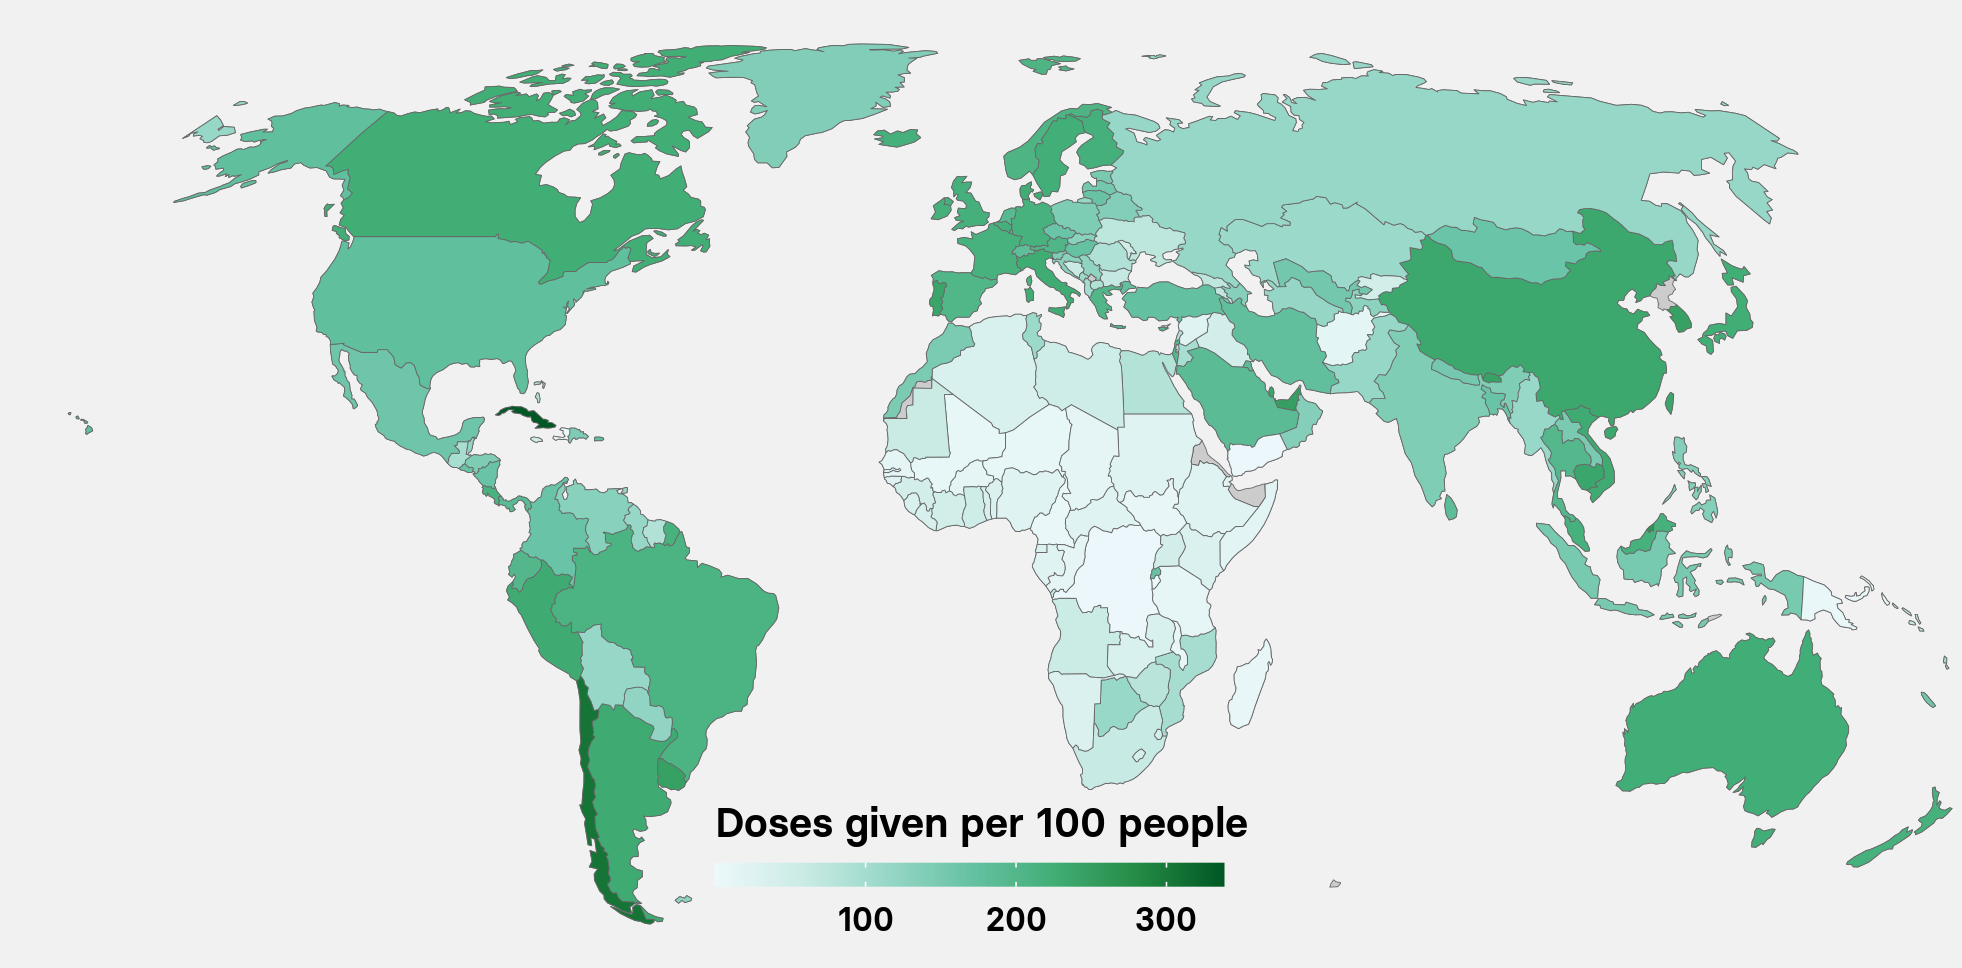 The rate of vaccination per 100 people around the world